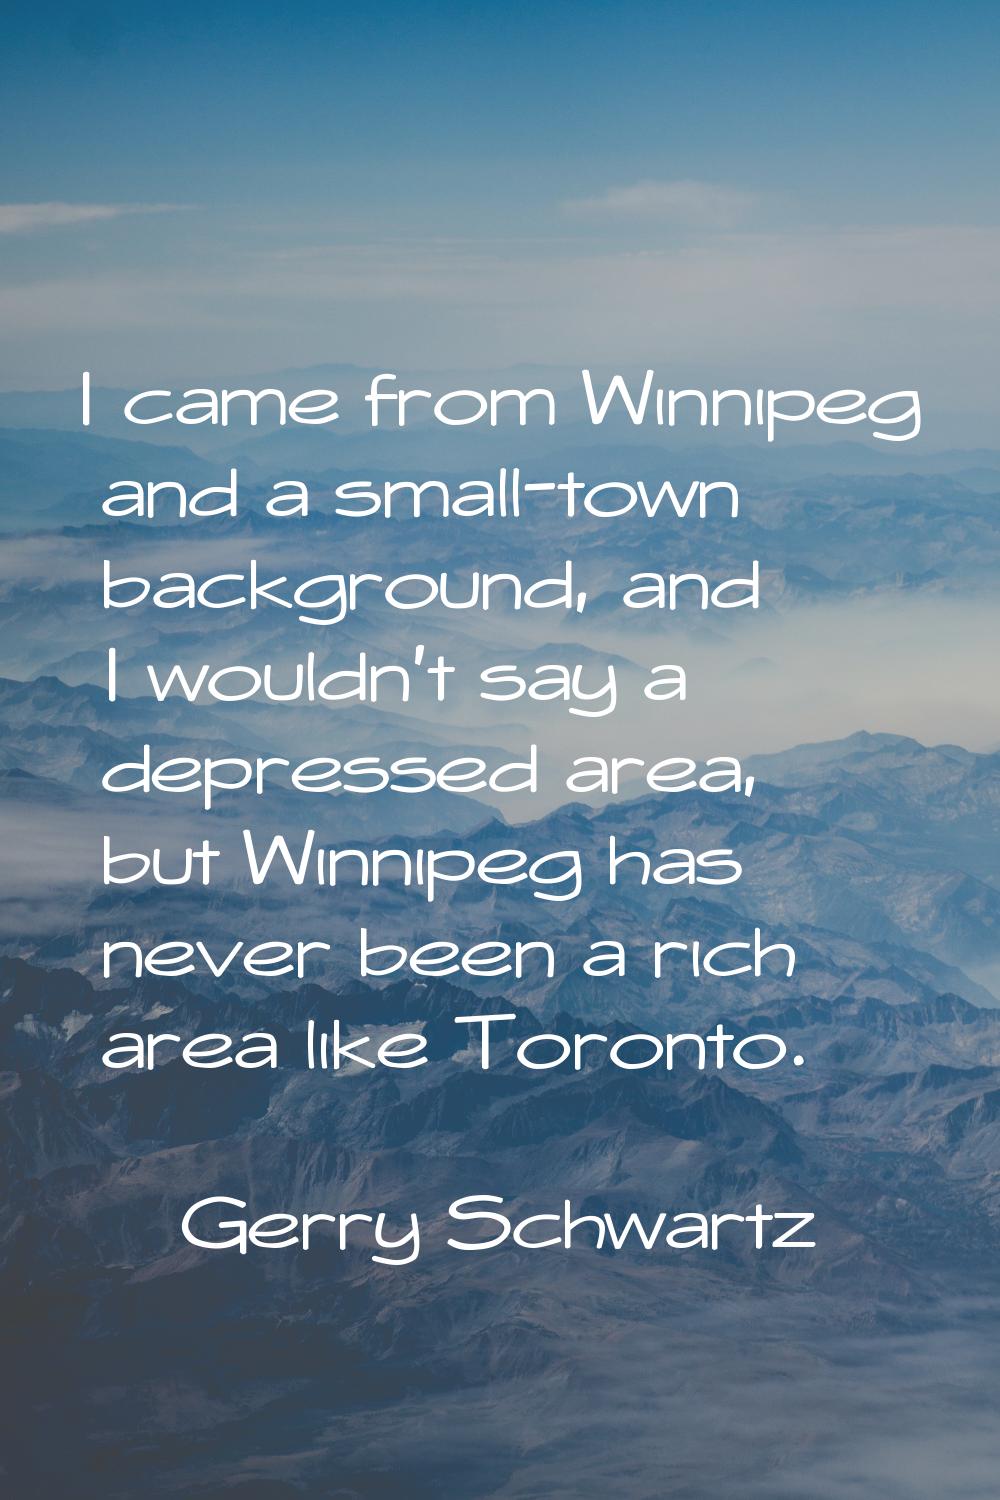 I came from Winnipeg and a small-town background, and I wouldn't say a depressed area, but Winnipeg